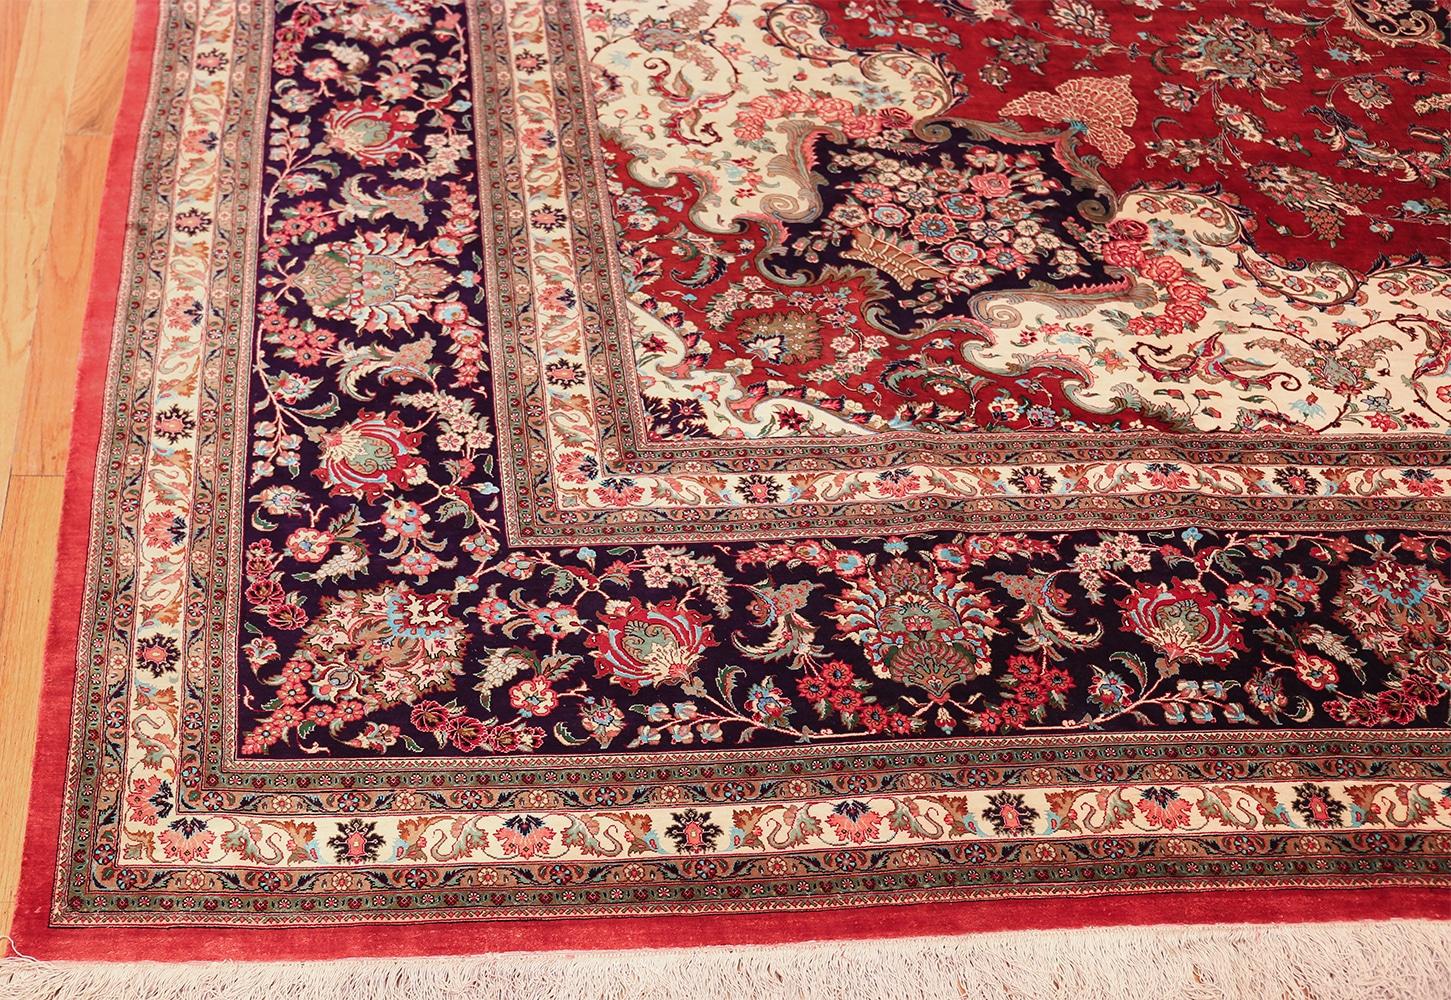 Hand-Knotted Large Floral Vintage Persian Silk Qum Rug. Size: 13 ft x 19 ft 9 in 